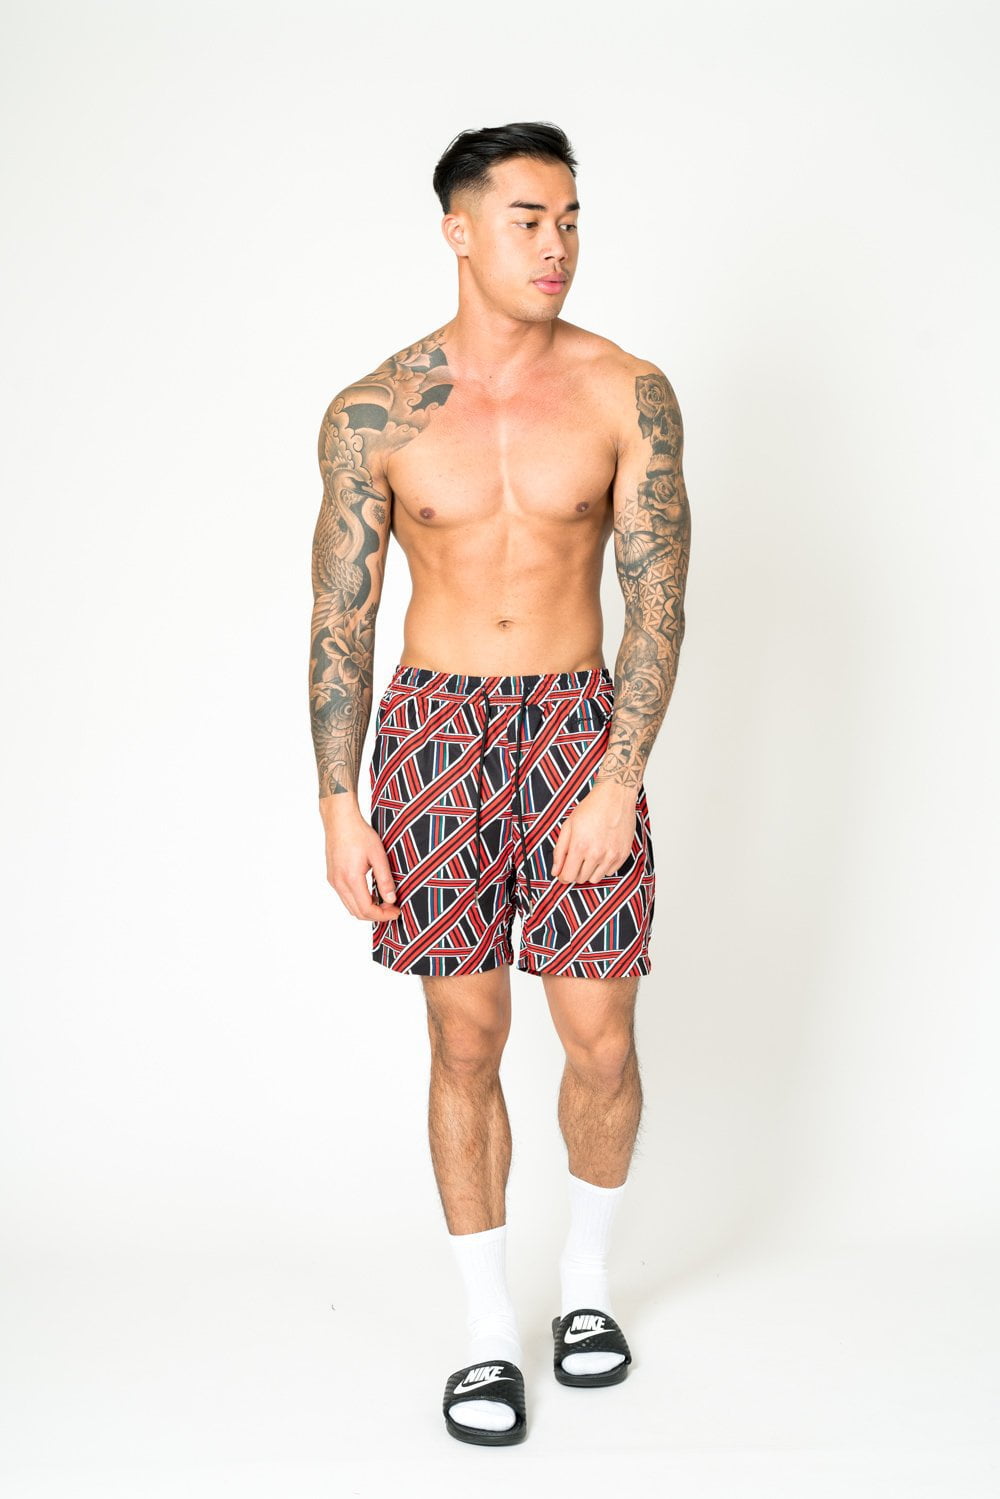 Relaxed fit shorts in red and black geometric pattern - Liquor N Poker LIQUOR N POKER